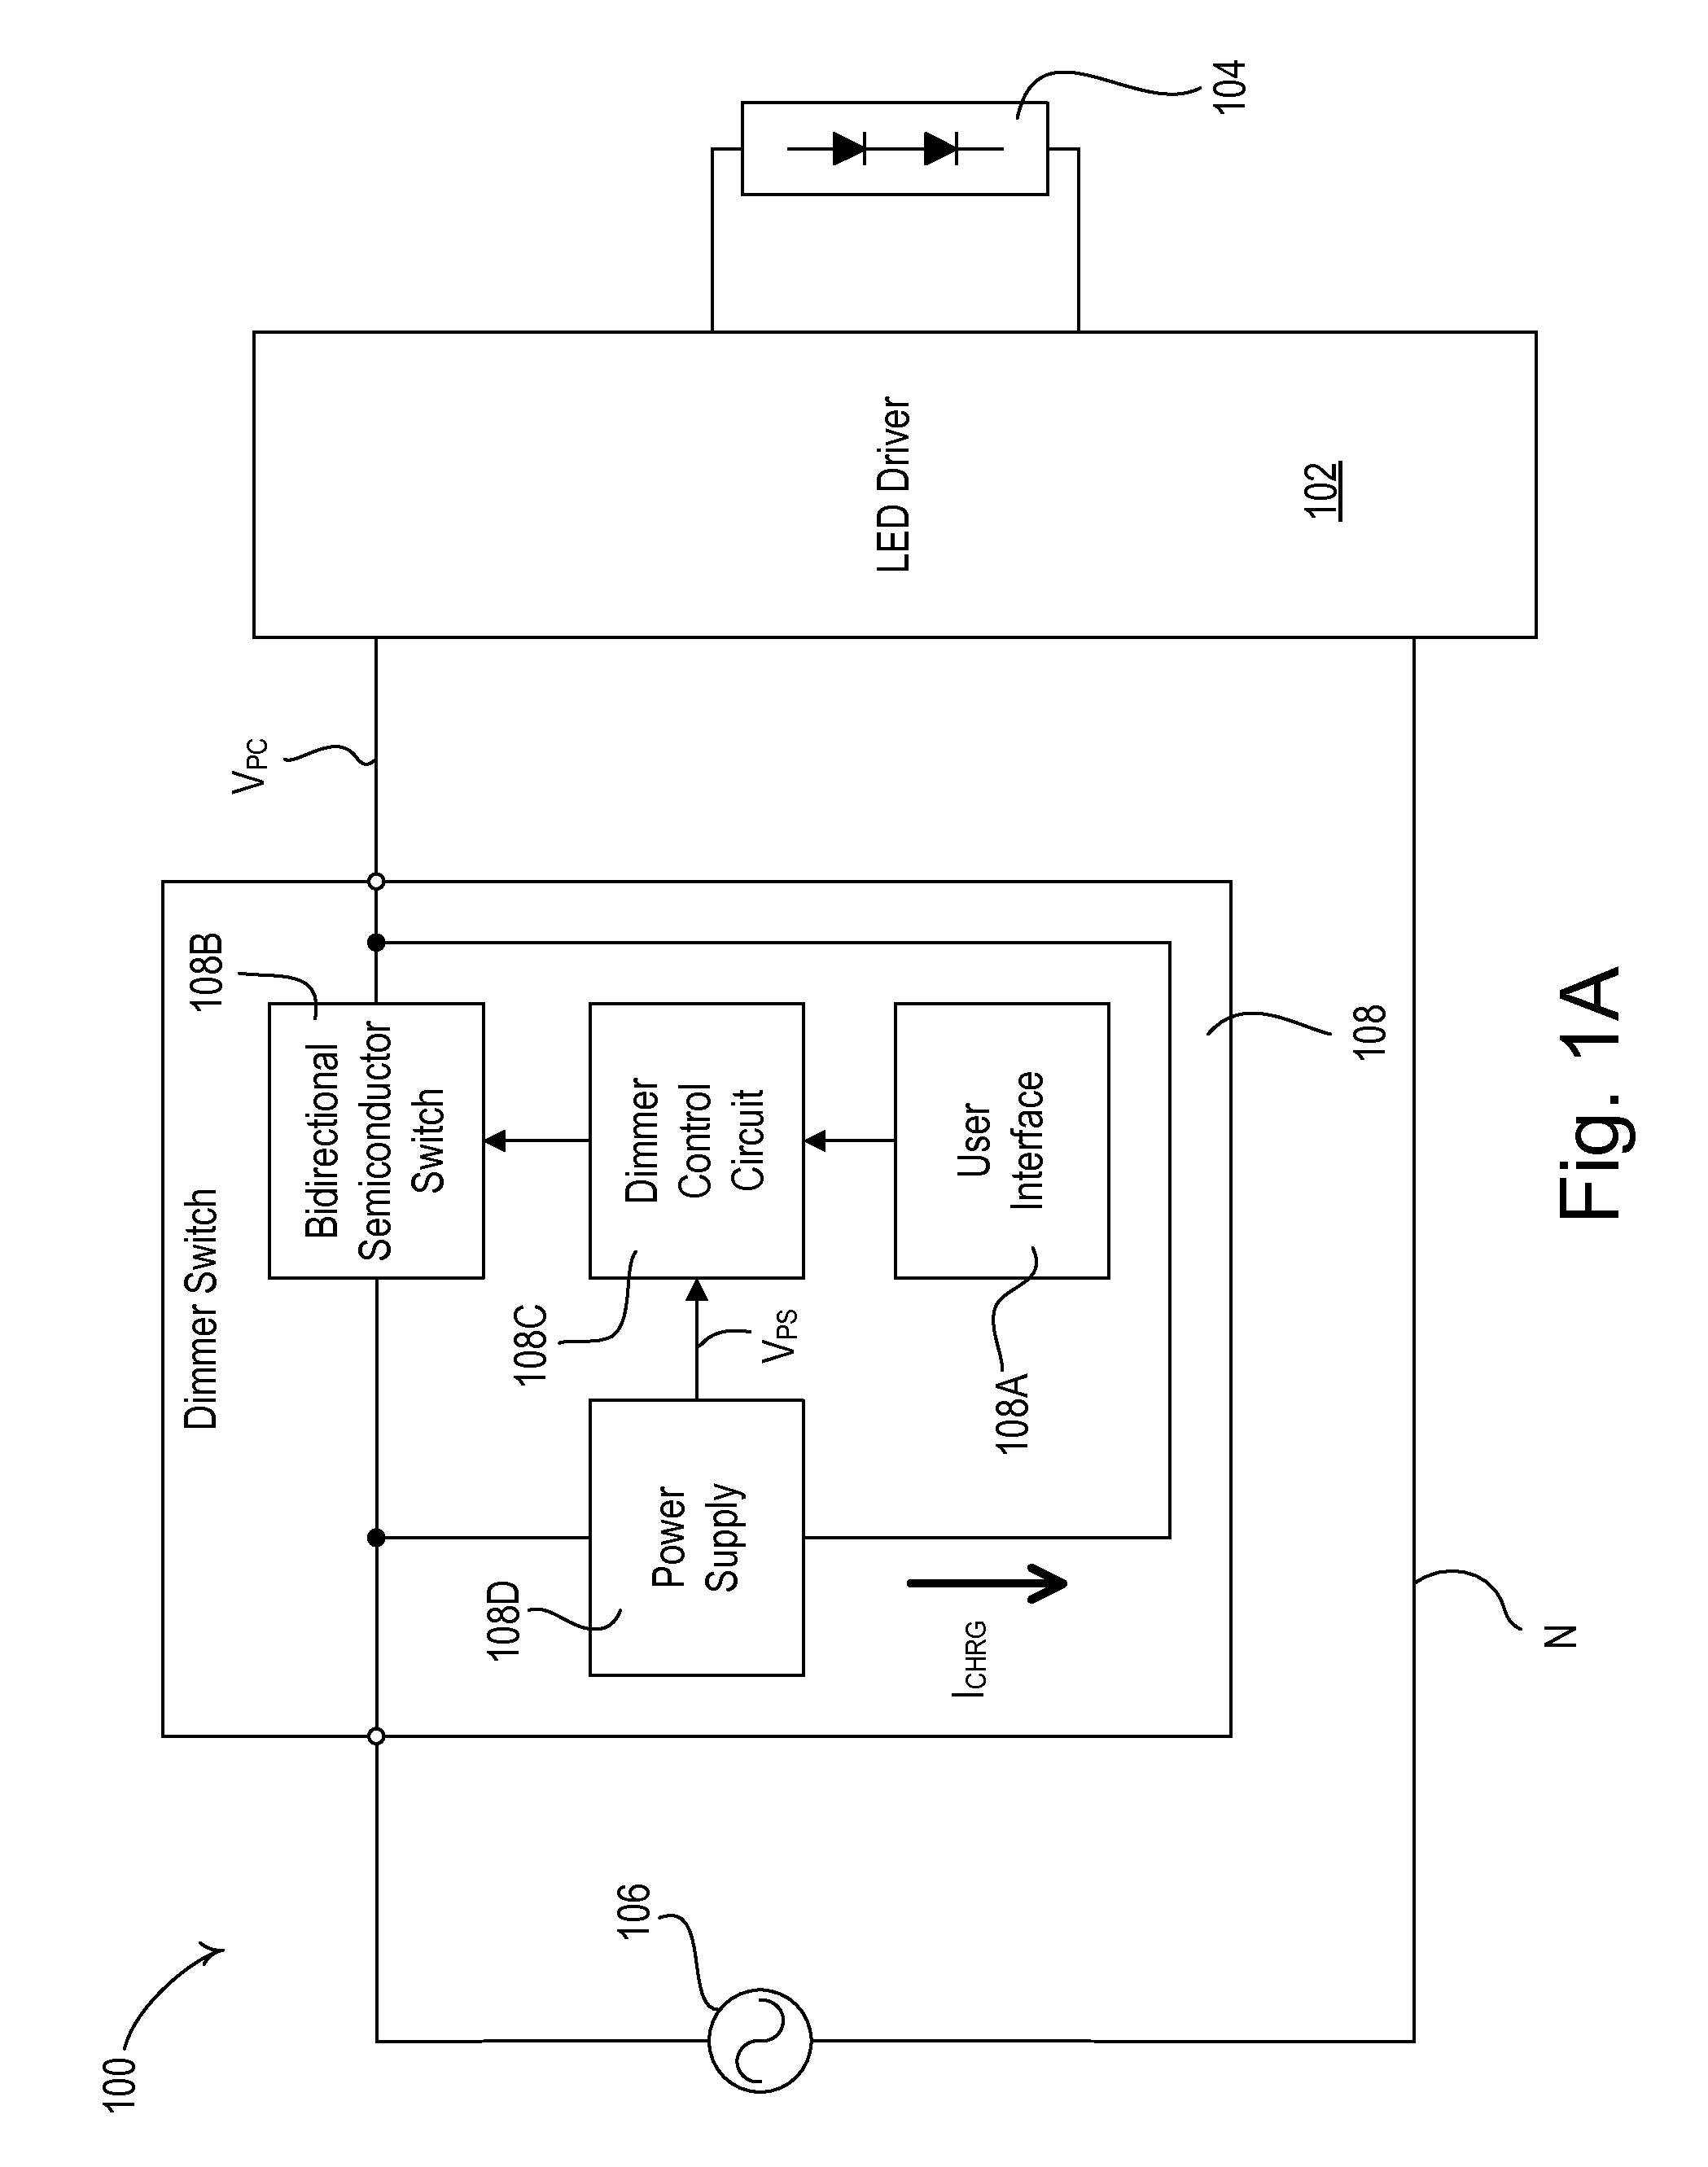 Controllable-load circuit for use with a load control device